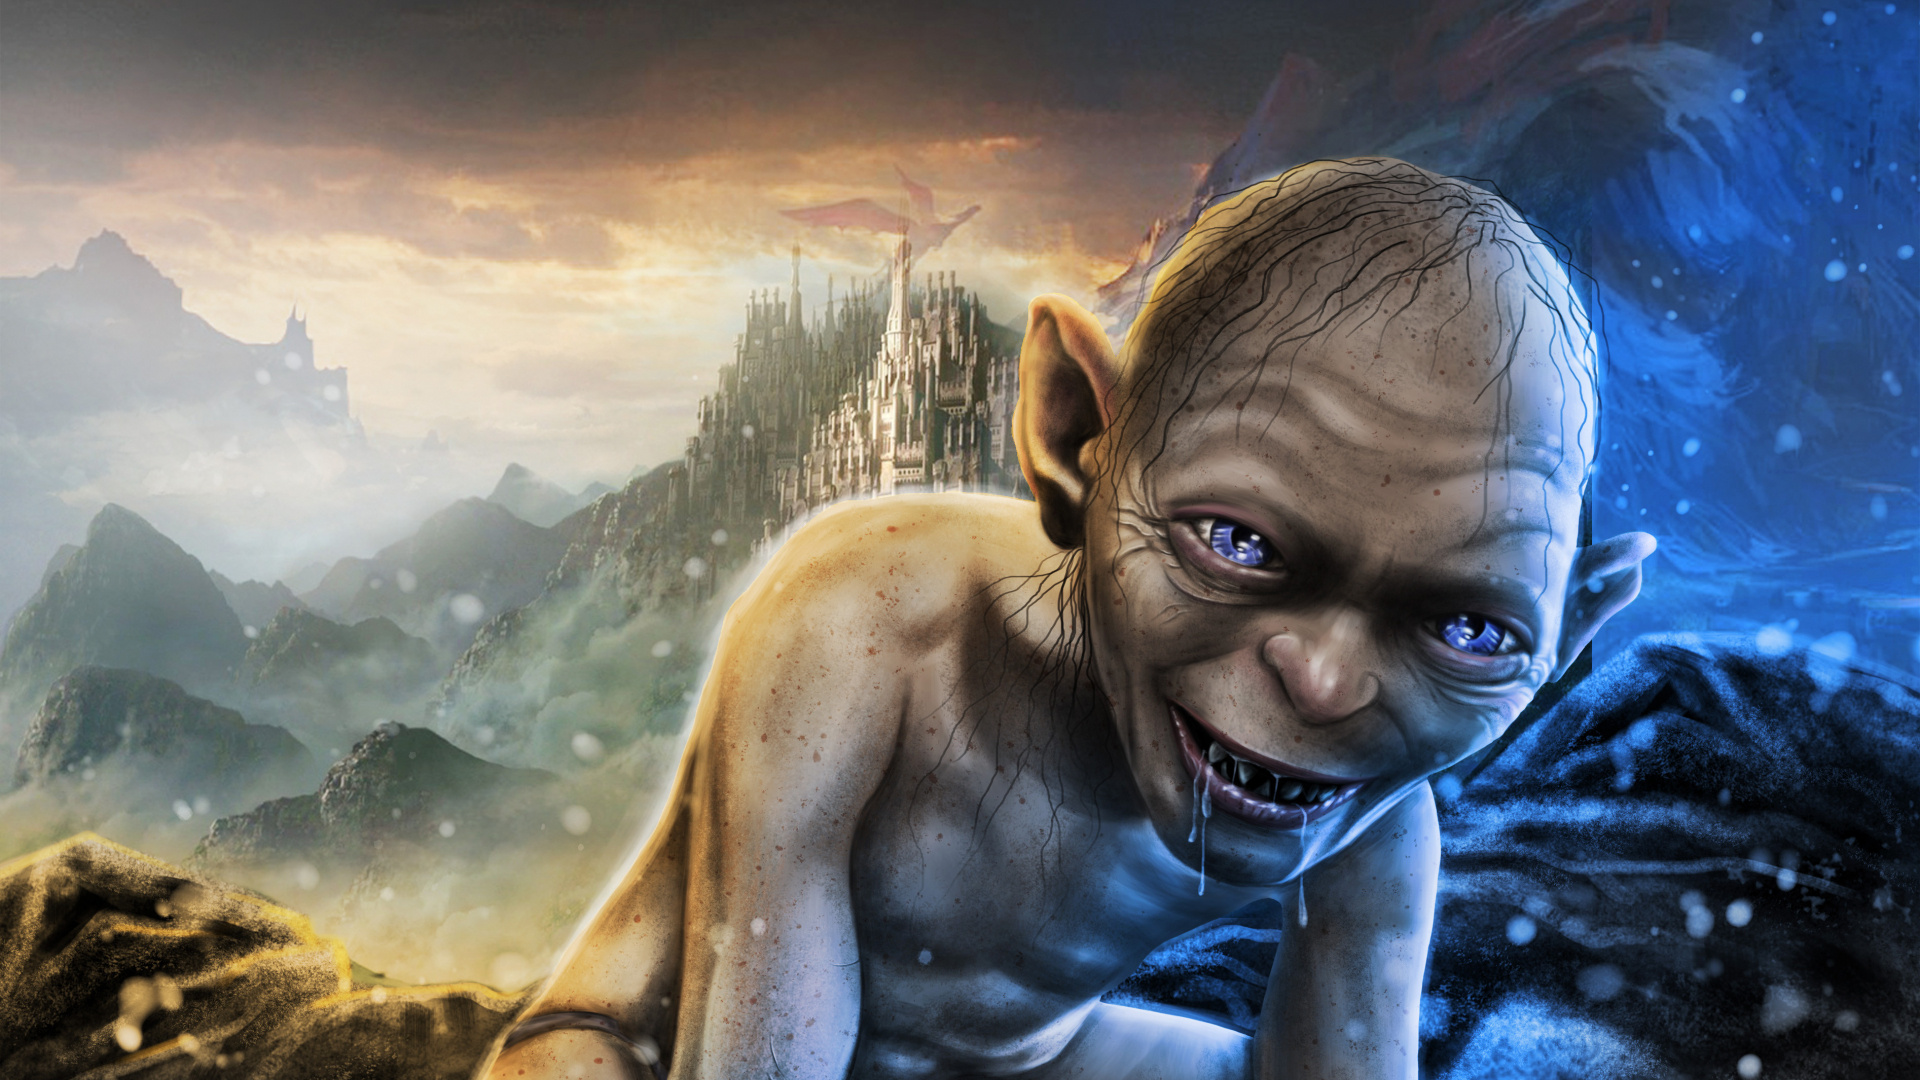 Smeagol, Lord of the Rings, High-resolution wallpapers, Free download, 1920x1080 Full HD Desktop